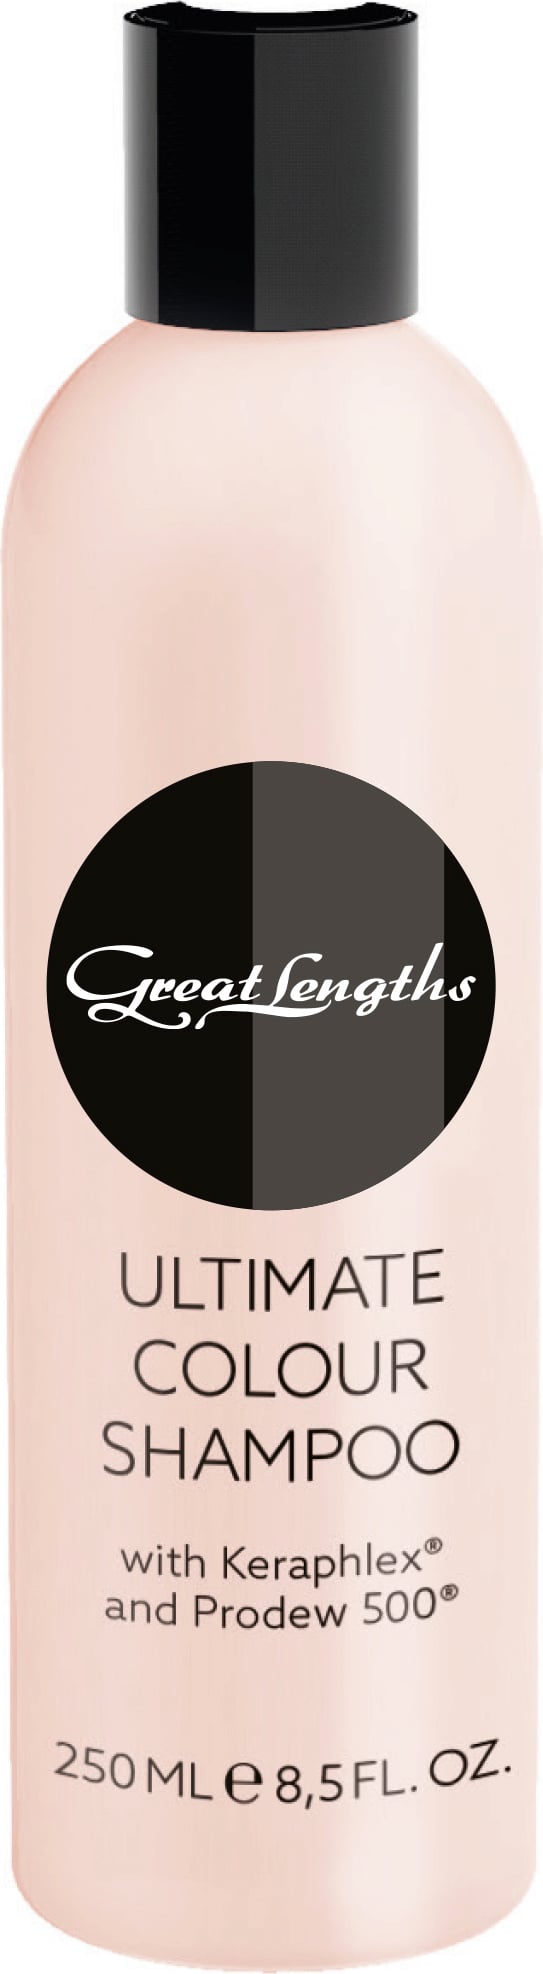 Great Lengths – Ultimate colour shampoo